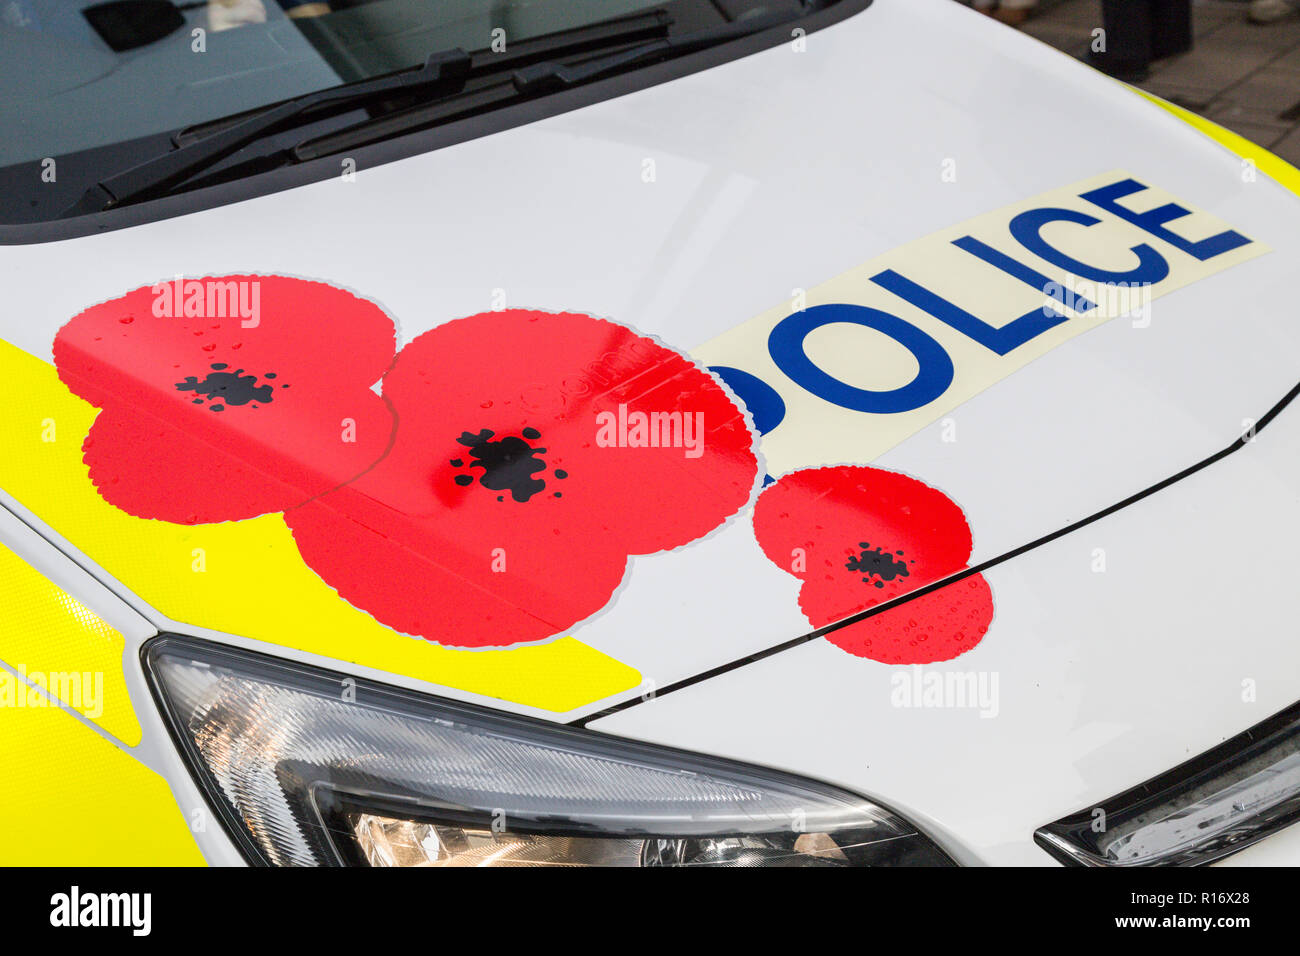 Sidmouth, Devon, UK. 9th November . Sidmouth, 9th Nov 18 Devon and Cornwall police have decorated two squad cars with vibrant poppies in honour of the 100th anniversary of the signing of the Armistice in 1918. One car is in operation in Devon, with the other in Cornwall. Photo Central/Alamy Live News Stock Photo